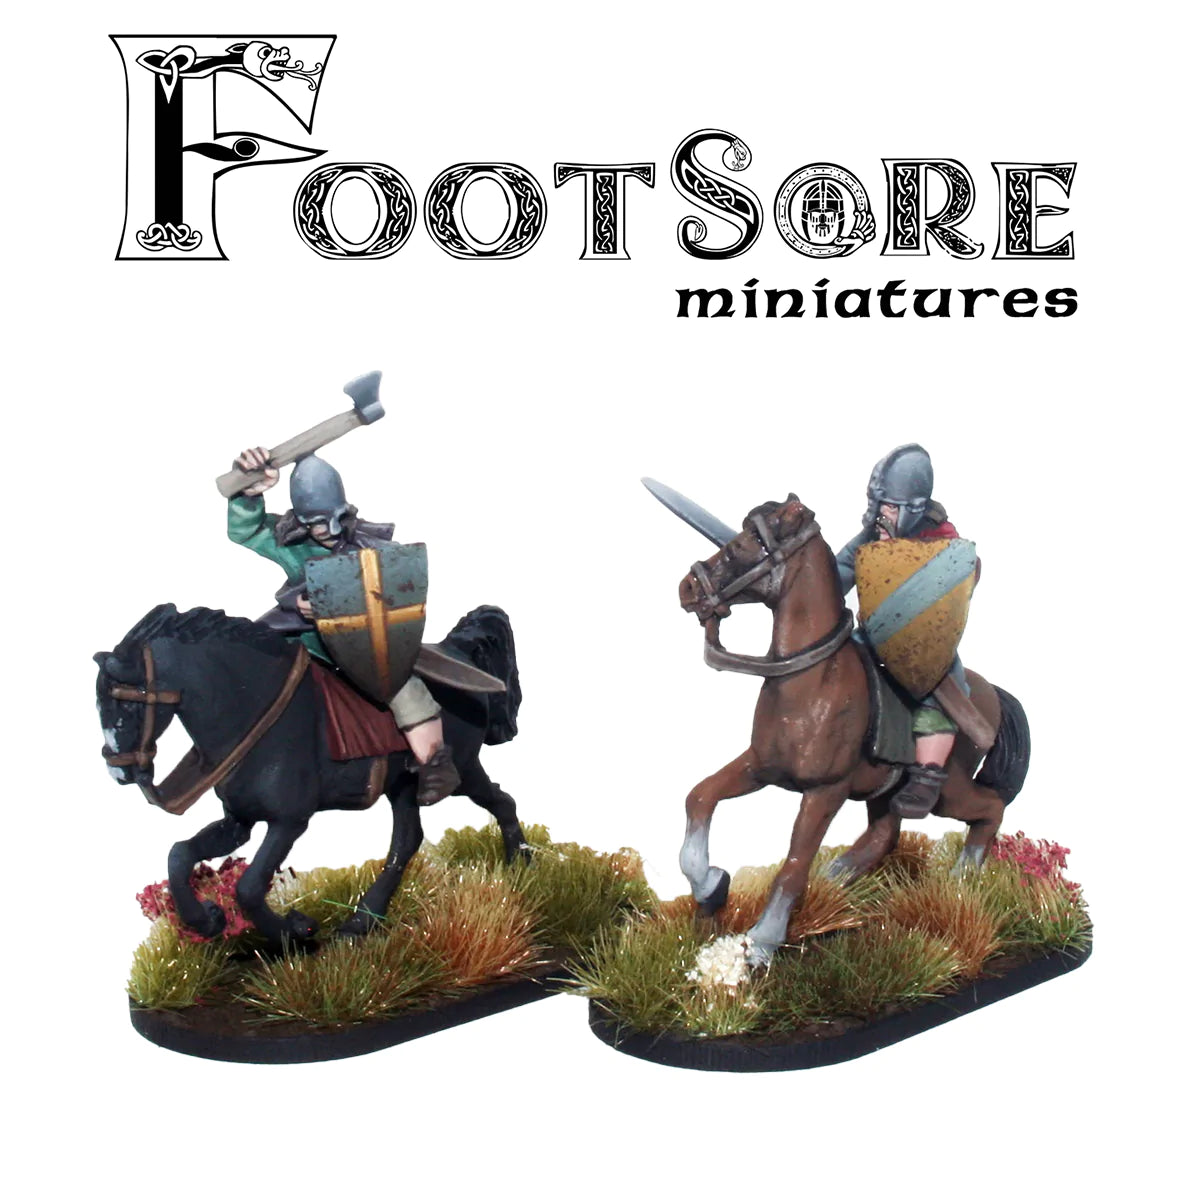 Welsh Light Medieval Cavalry: Footsore Miniatures